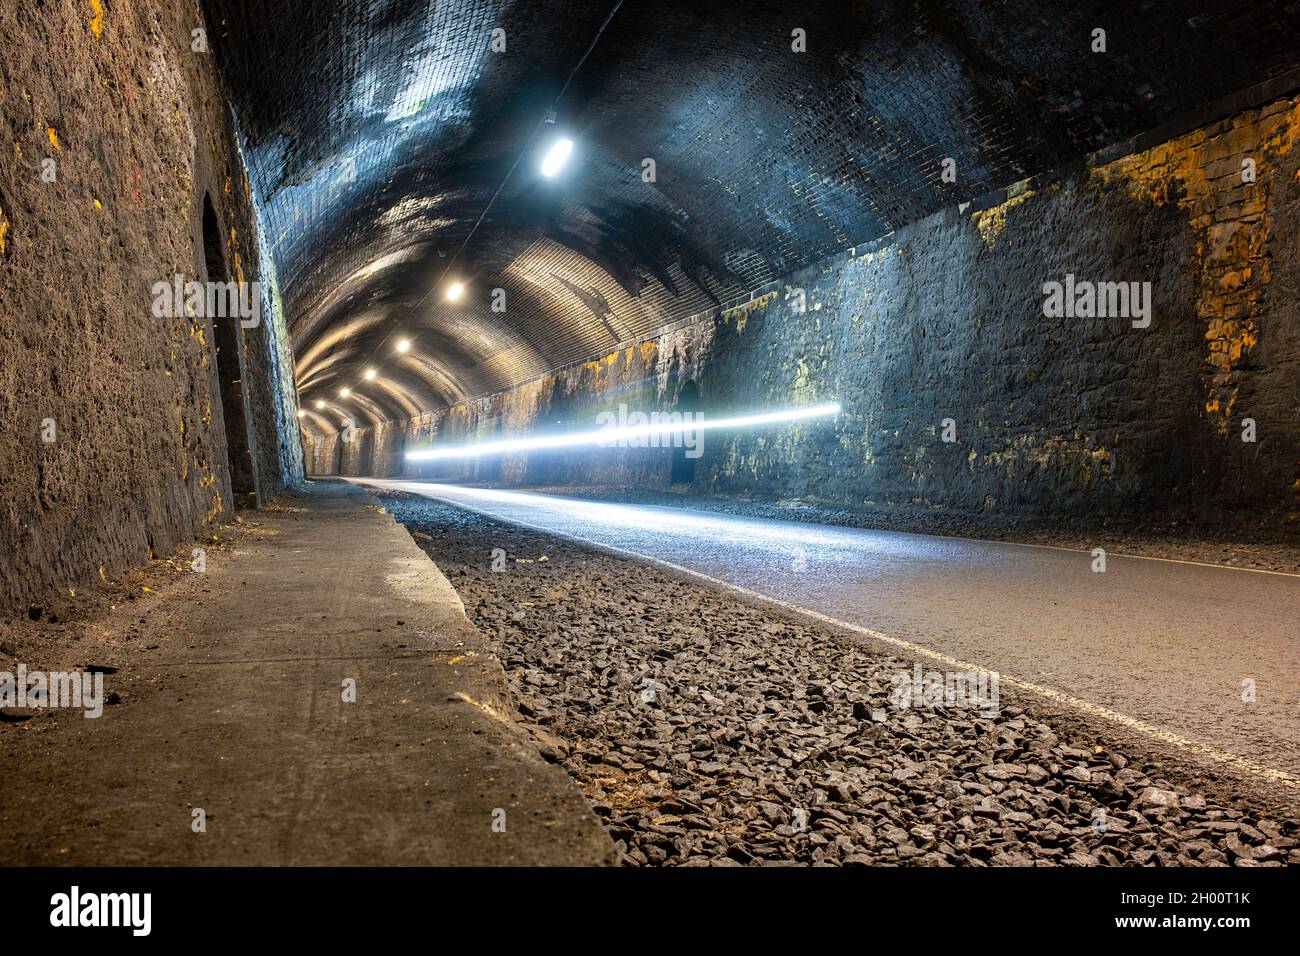 Monsal trail cycle path through old lit train tunnels Derbyshire UK Stock Photo